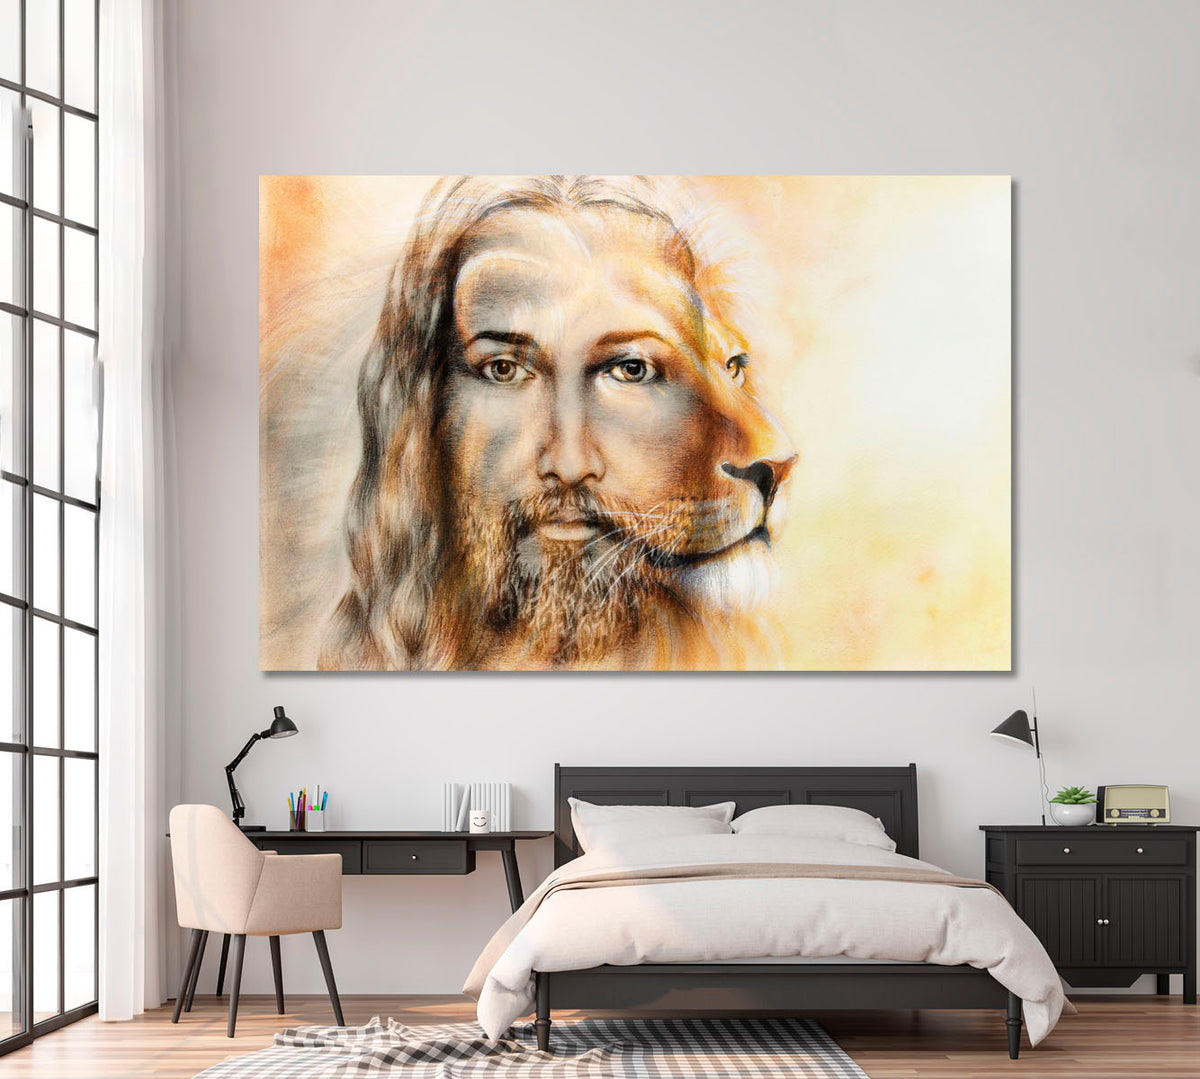 Eye Contact Jesus Christ And Lion Double Face Religious Modern Art Artesty 1 panel 24" x 16" 